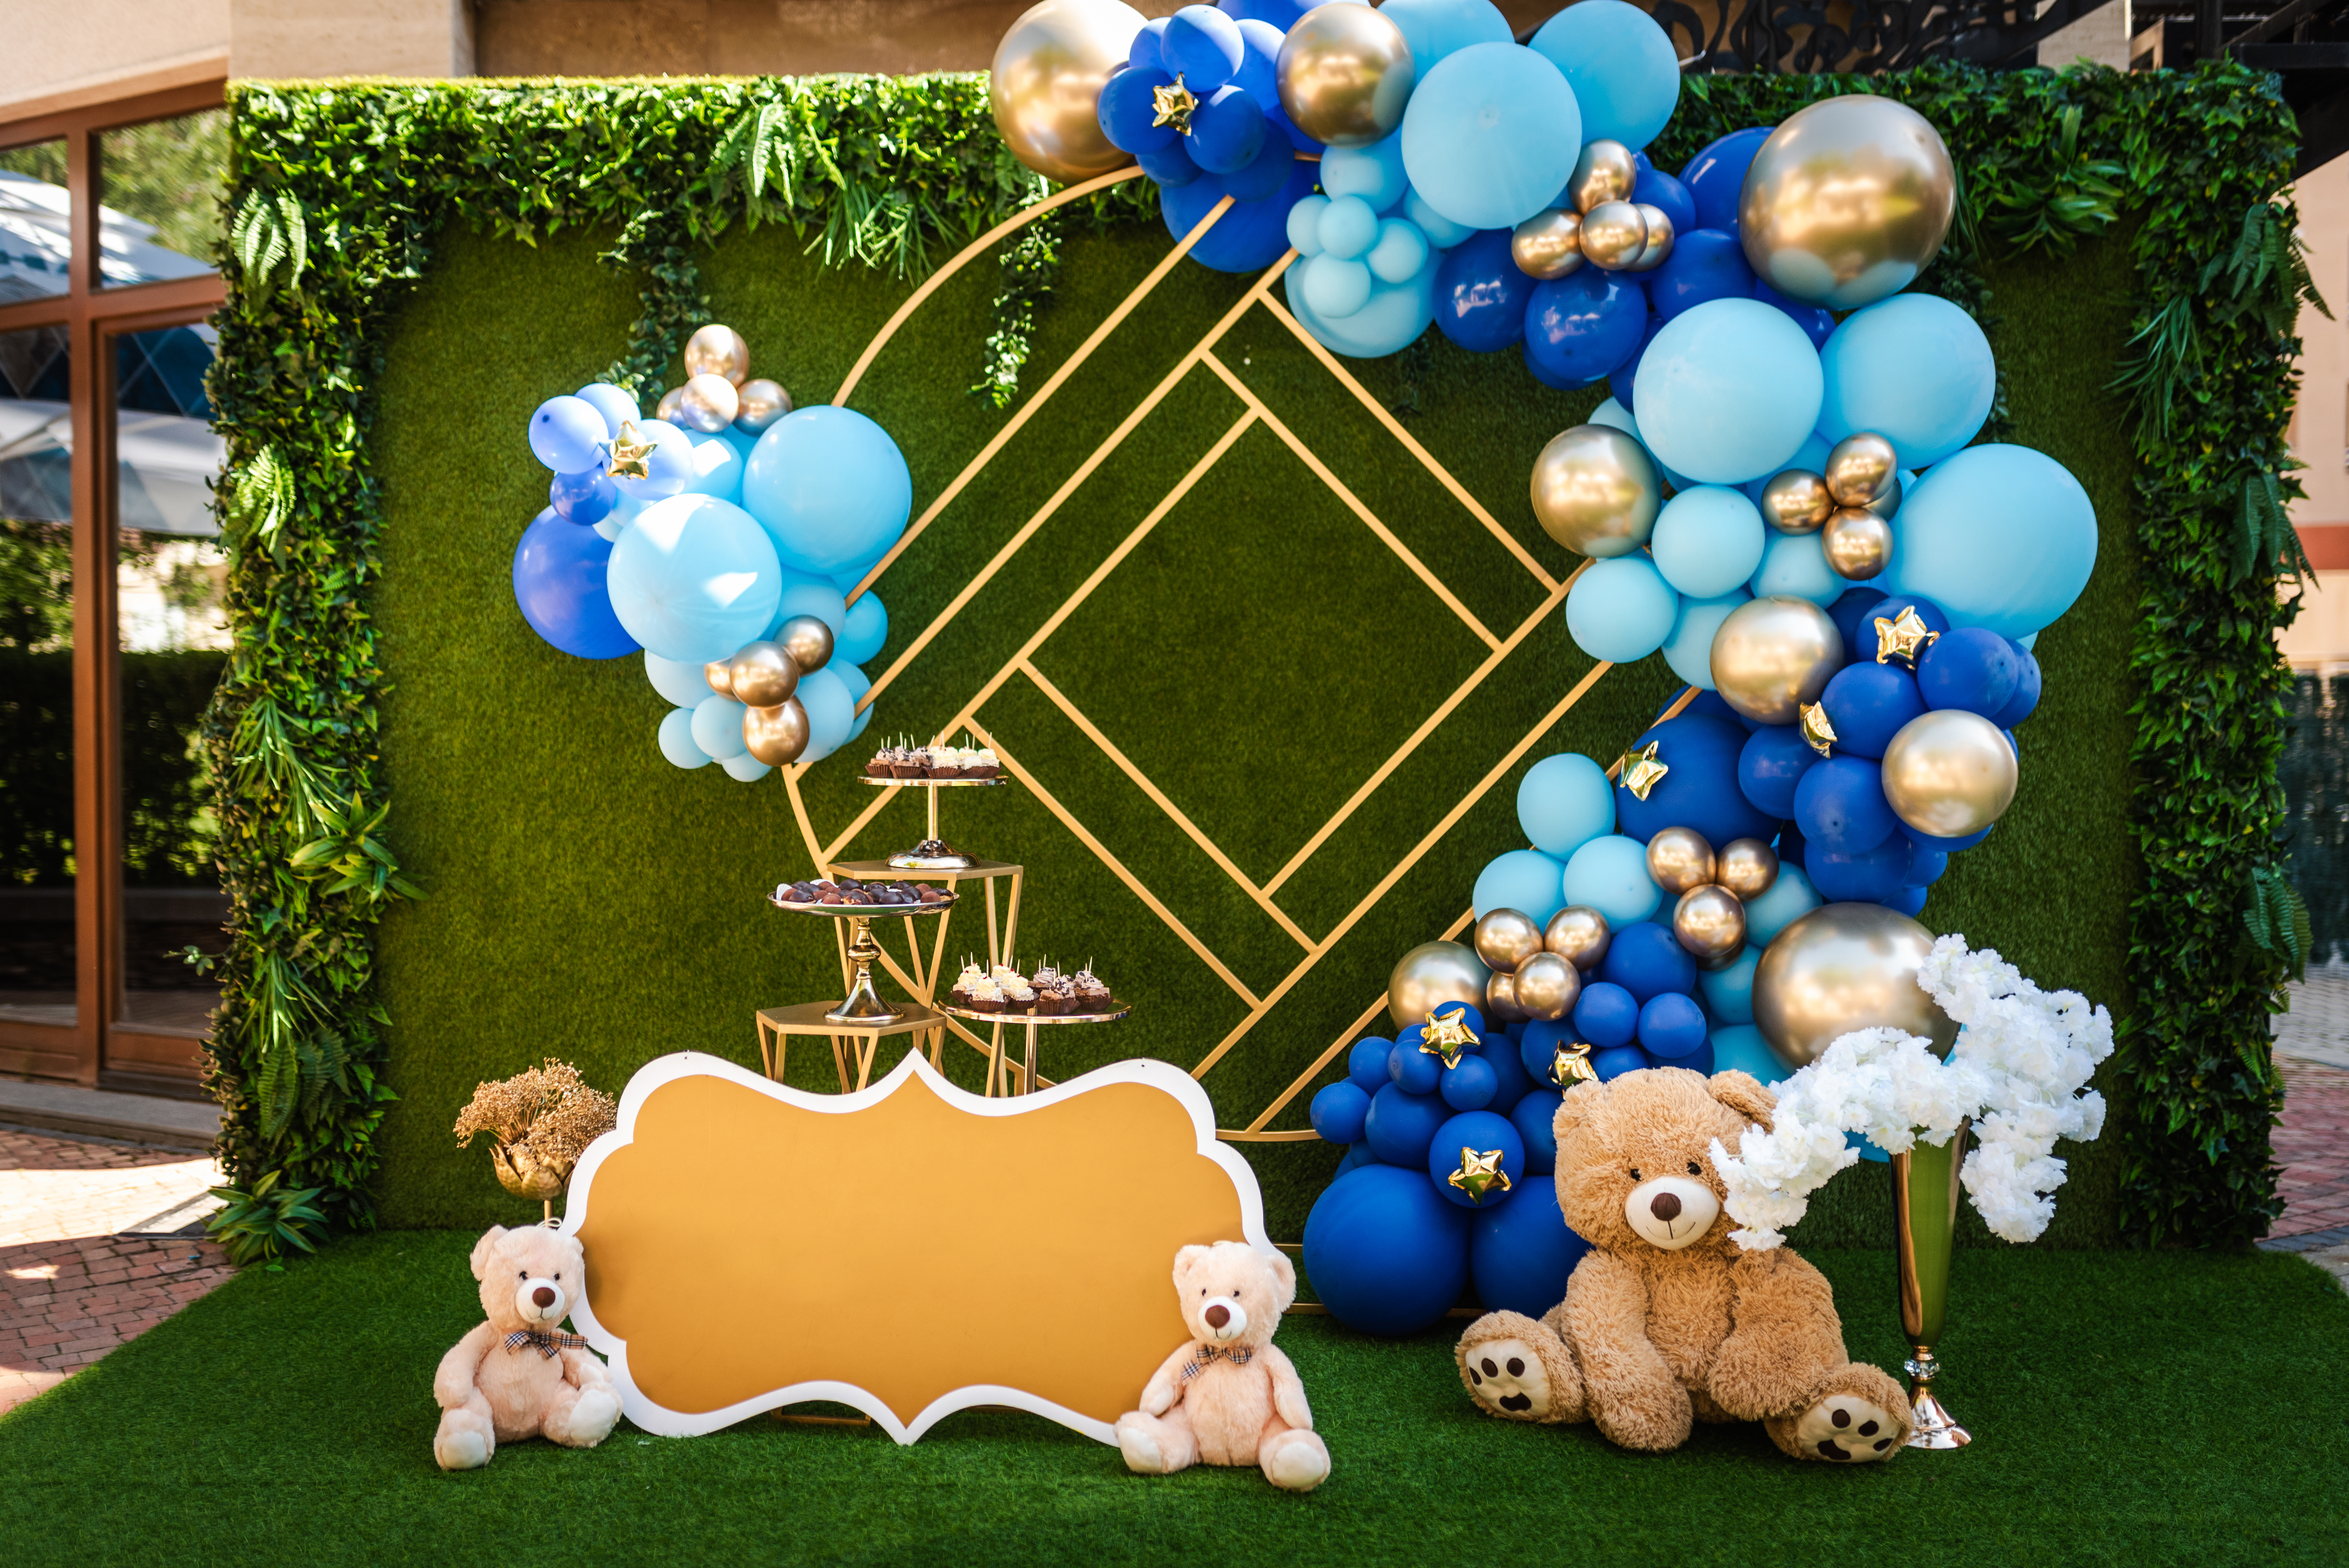 Decoration for a children's party. | Source: Getty Images